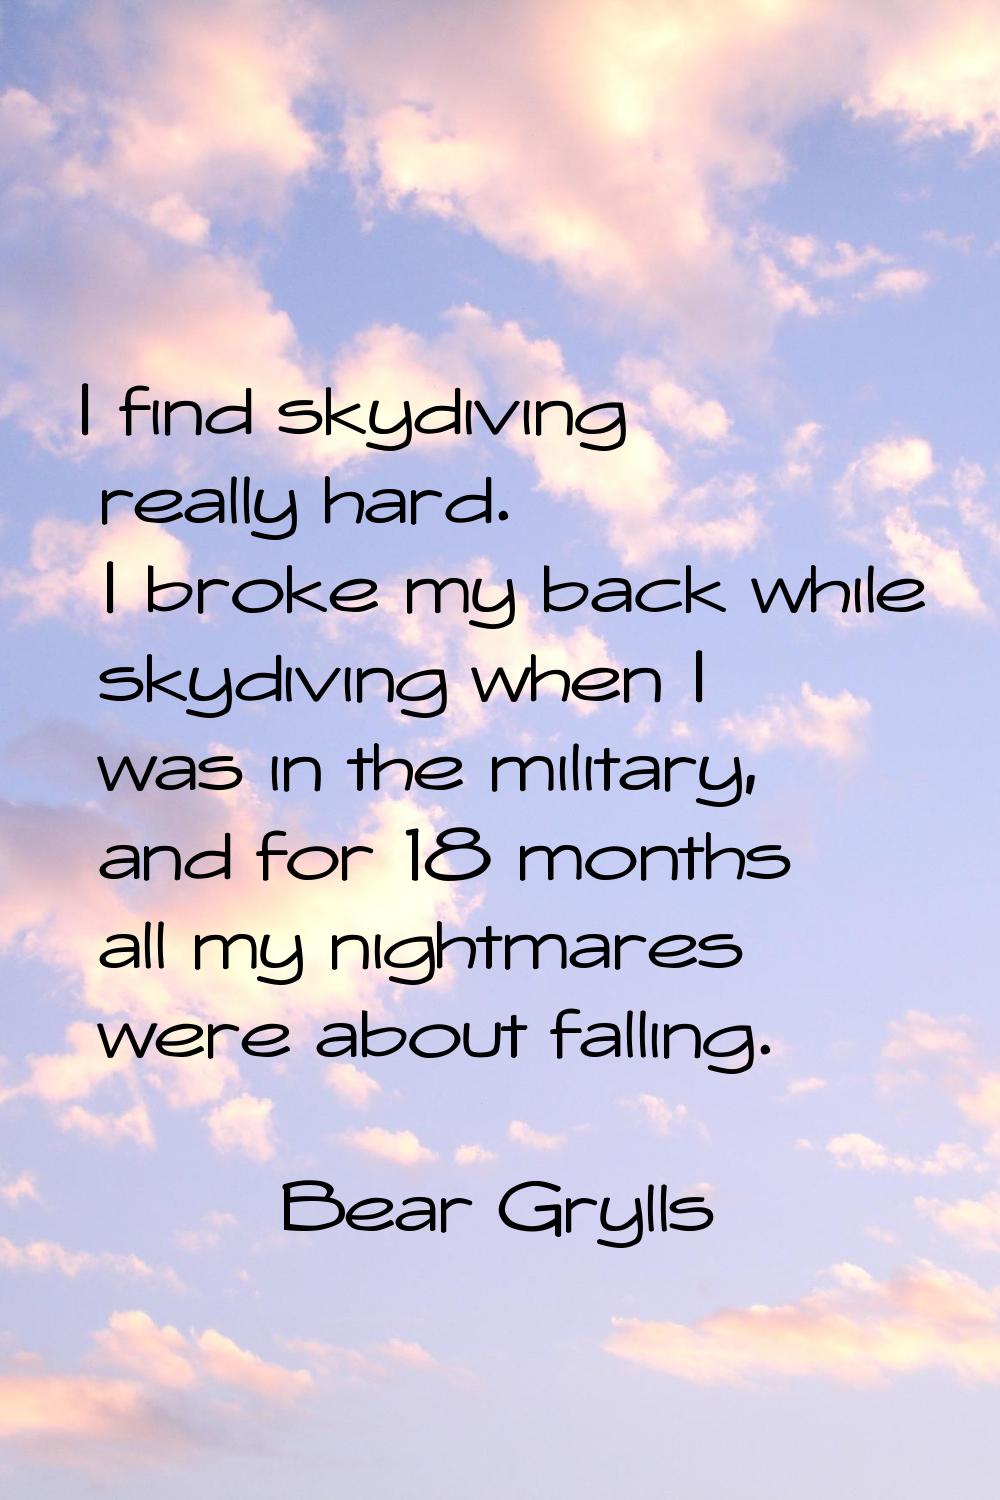 I find skydiving really hard. I broke my back while skydiving when I was in the military, and for 1